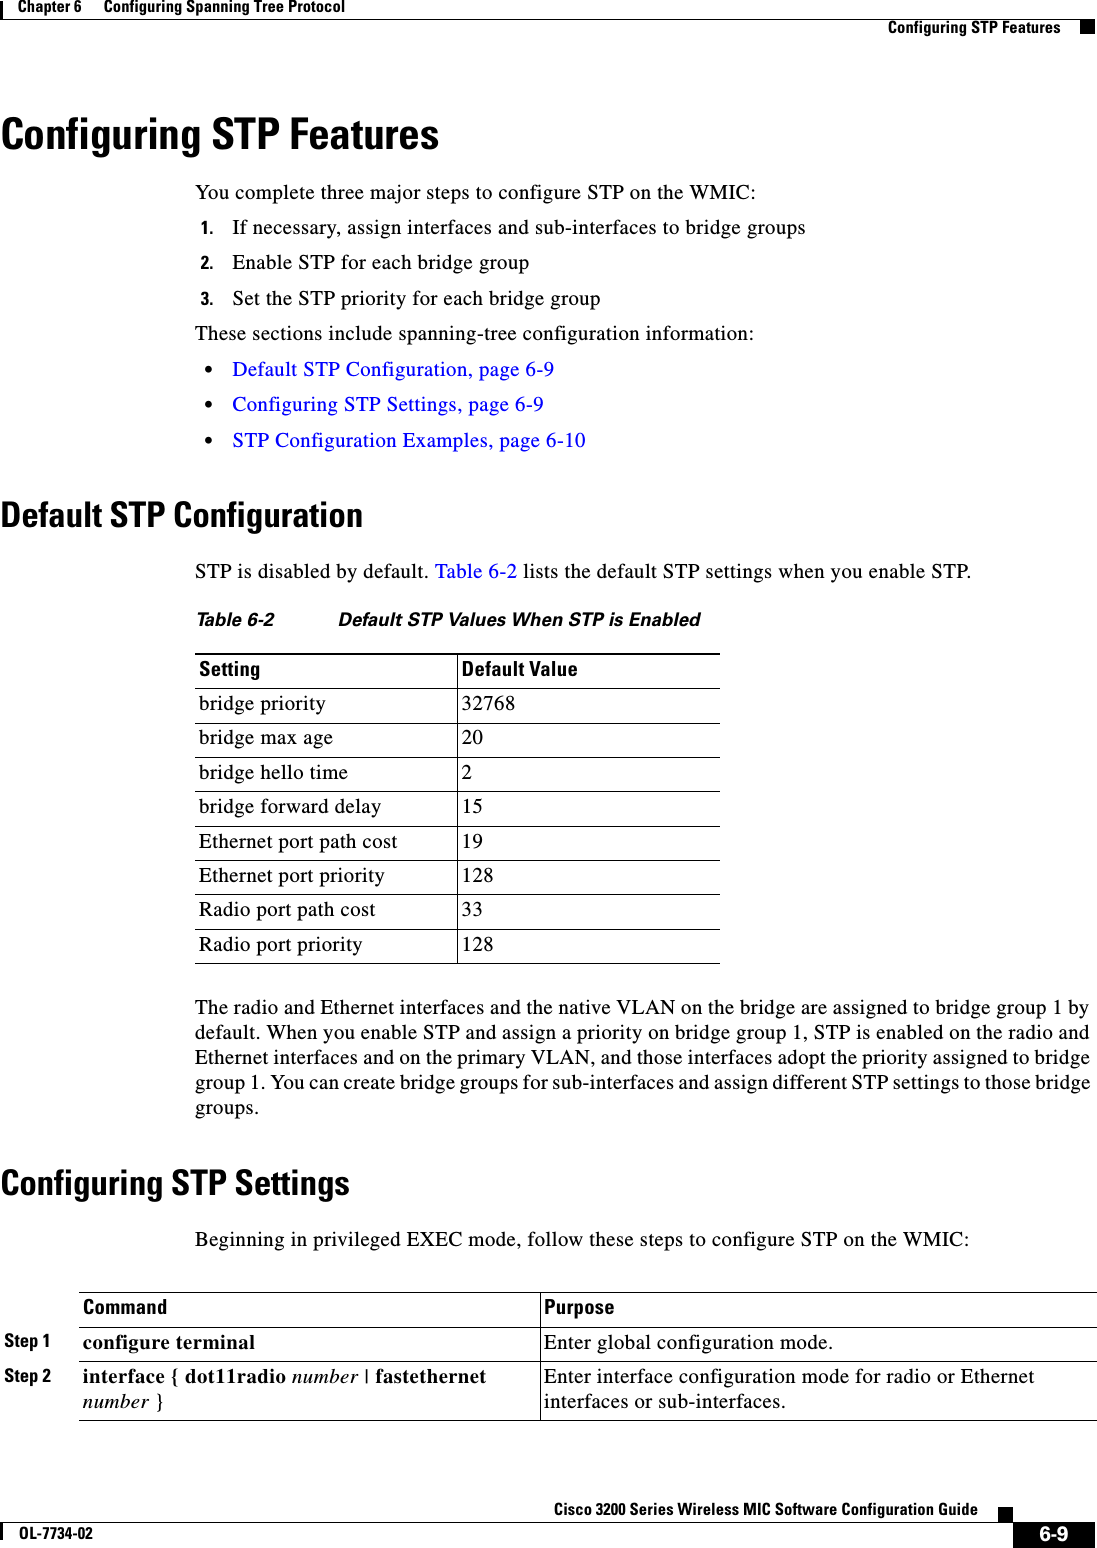 6-9Cisco 3200 Series Wireless MIC Software Configuration GuideOL-7734-02Chapter 6      Configuring Spanning Tree ProtocolConfiguring STP FeaturesConfiguring STP FeaturesYou complete three major steps to configure STP on the WMIC:1. If necessary, assign interfaces and sub-interfaces to bridge groups 2. Enable STP for each bridge group3. Set the STP priority for each bridge groupThese sections include spanning-tree configuration information:•Default STP Configuration, page 6-9•Configuring STP Settings, page 6-9•STP Configuration Examples, page 6-10Default STP ConfigurationSTP is disabled by default. Table 6-2 lists the default STP settings when you enable STP.The radio and Ethernet interfaces and the native VLAN on the bridge are assigned to bridge group 1 by default. When you enable STP and assign a priority on bridge group 1, STP is enabled on the radio and Ethernet interfaces and on the primary VLAN, and those interfaces adopt the priority assigned to bridge group 1. You can create bridge groups for sub-interfaces and assign different STP settings to those bridge groups.Configuring STP SettingsBeginning in privileged EXEC mode, follow these steps to configure STP on the WMIC:Table 6-2 Default STP Values When STP is EnabledSetting Default Valuebridge priority 32768bridge max age 20bridge hello time 2bridge forward delay 15Ethernet port path cost 19Ethernet port priority 128Radio port path cost 33Radio port priority 128Command PurposeStep 1 configure terminal Enter global configuration mode.Step 2 interface { dot11radio number | fastethernet number }Enter interface configuration mode for radio or Ethernet interfaces or sub-interfaces. 